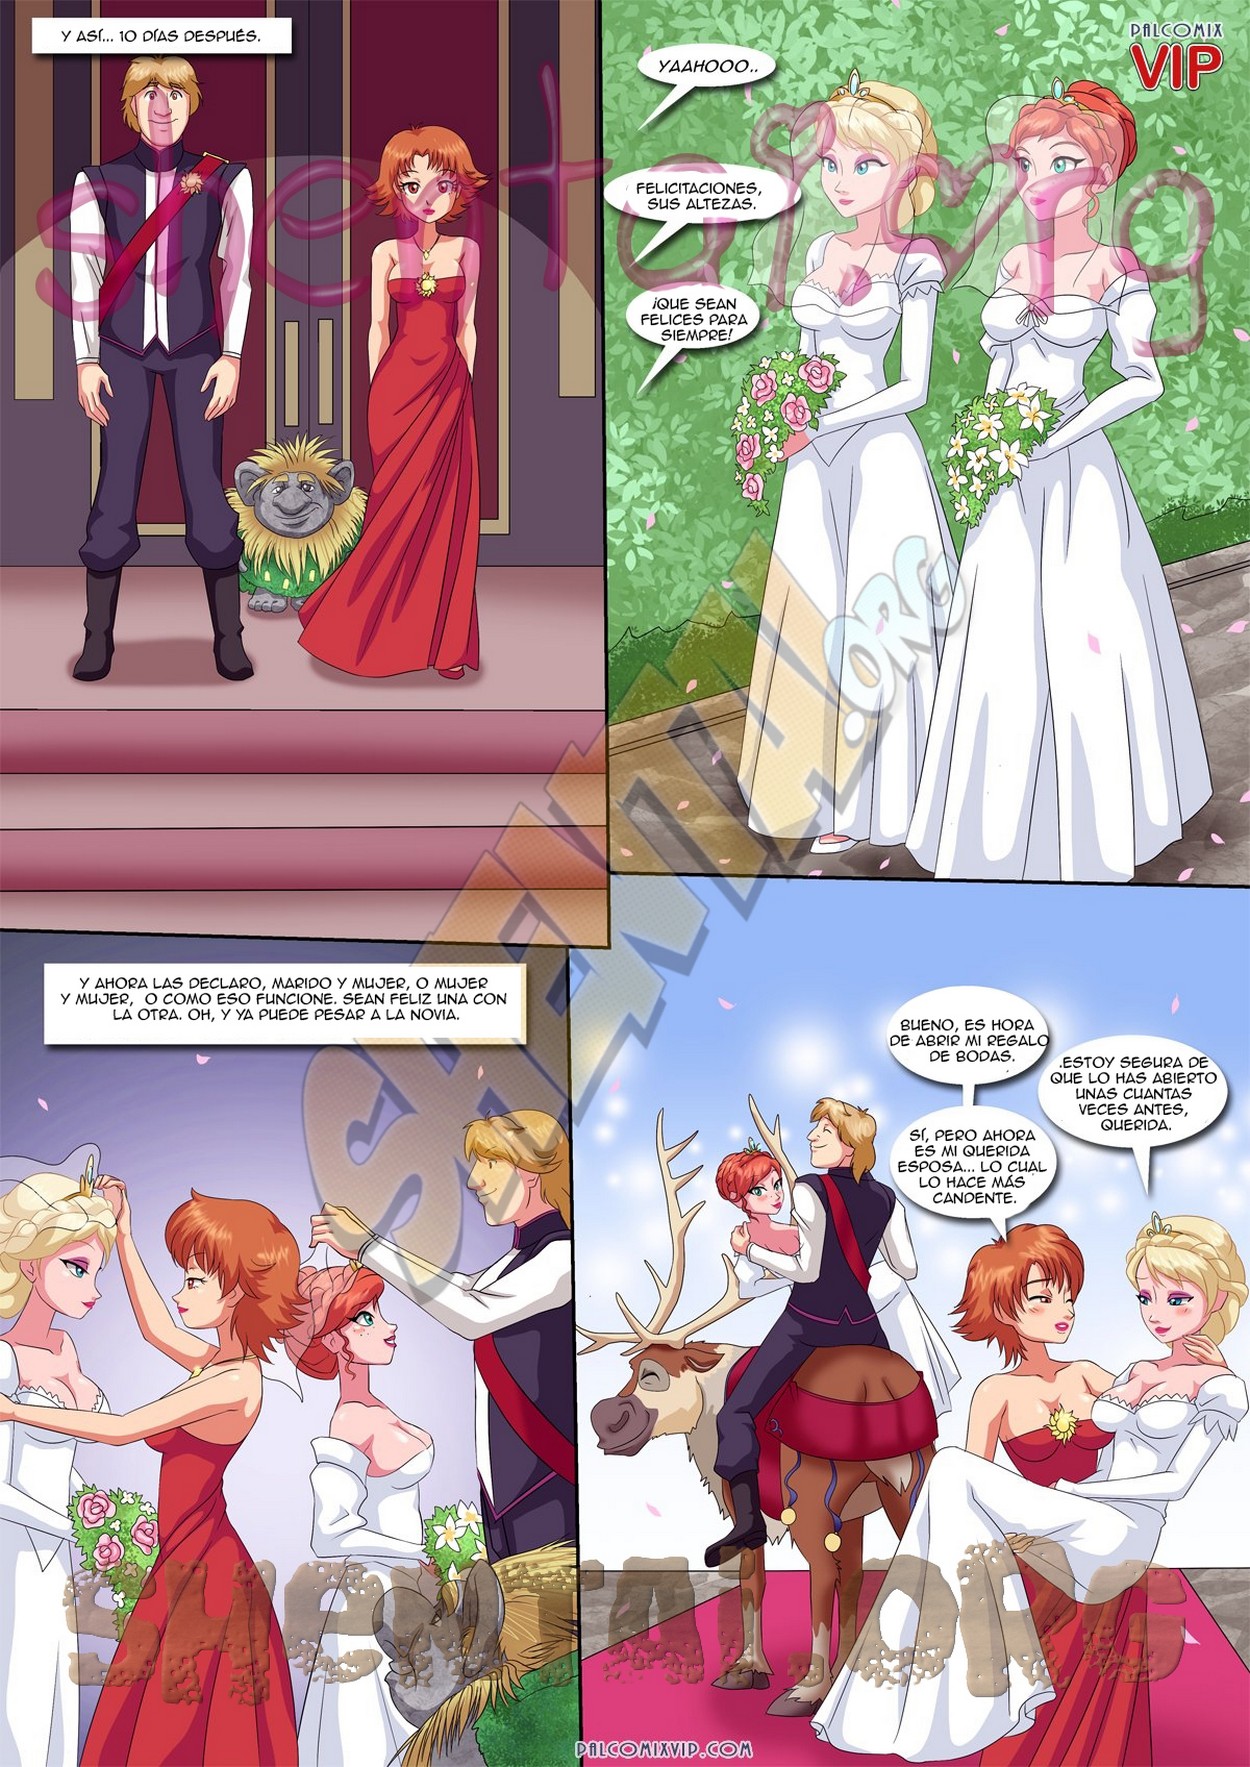 50 Shades of Frozen – Palcomix - 088cb991ef26dfb26147062460d9a7ee